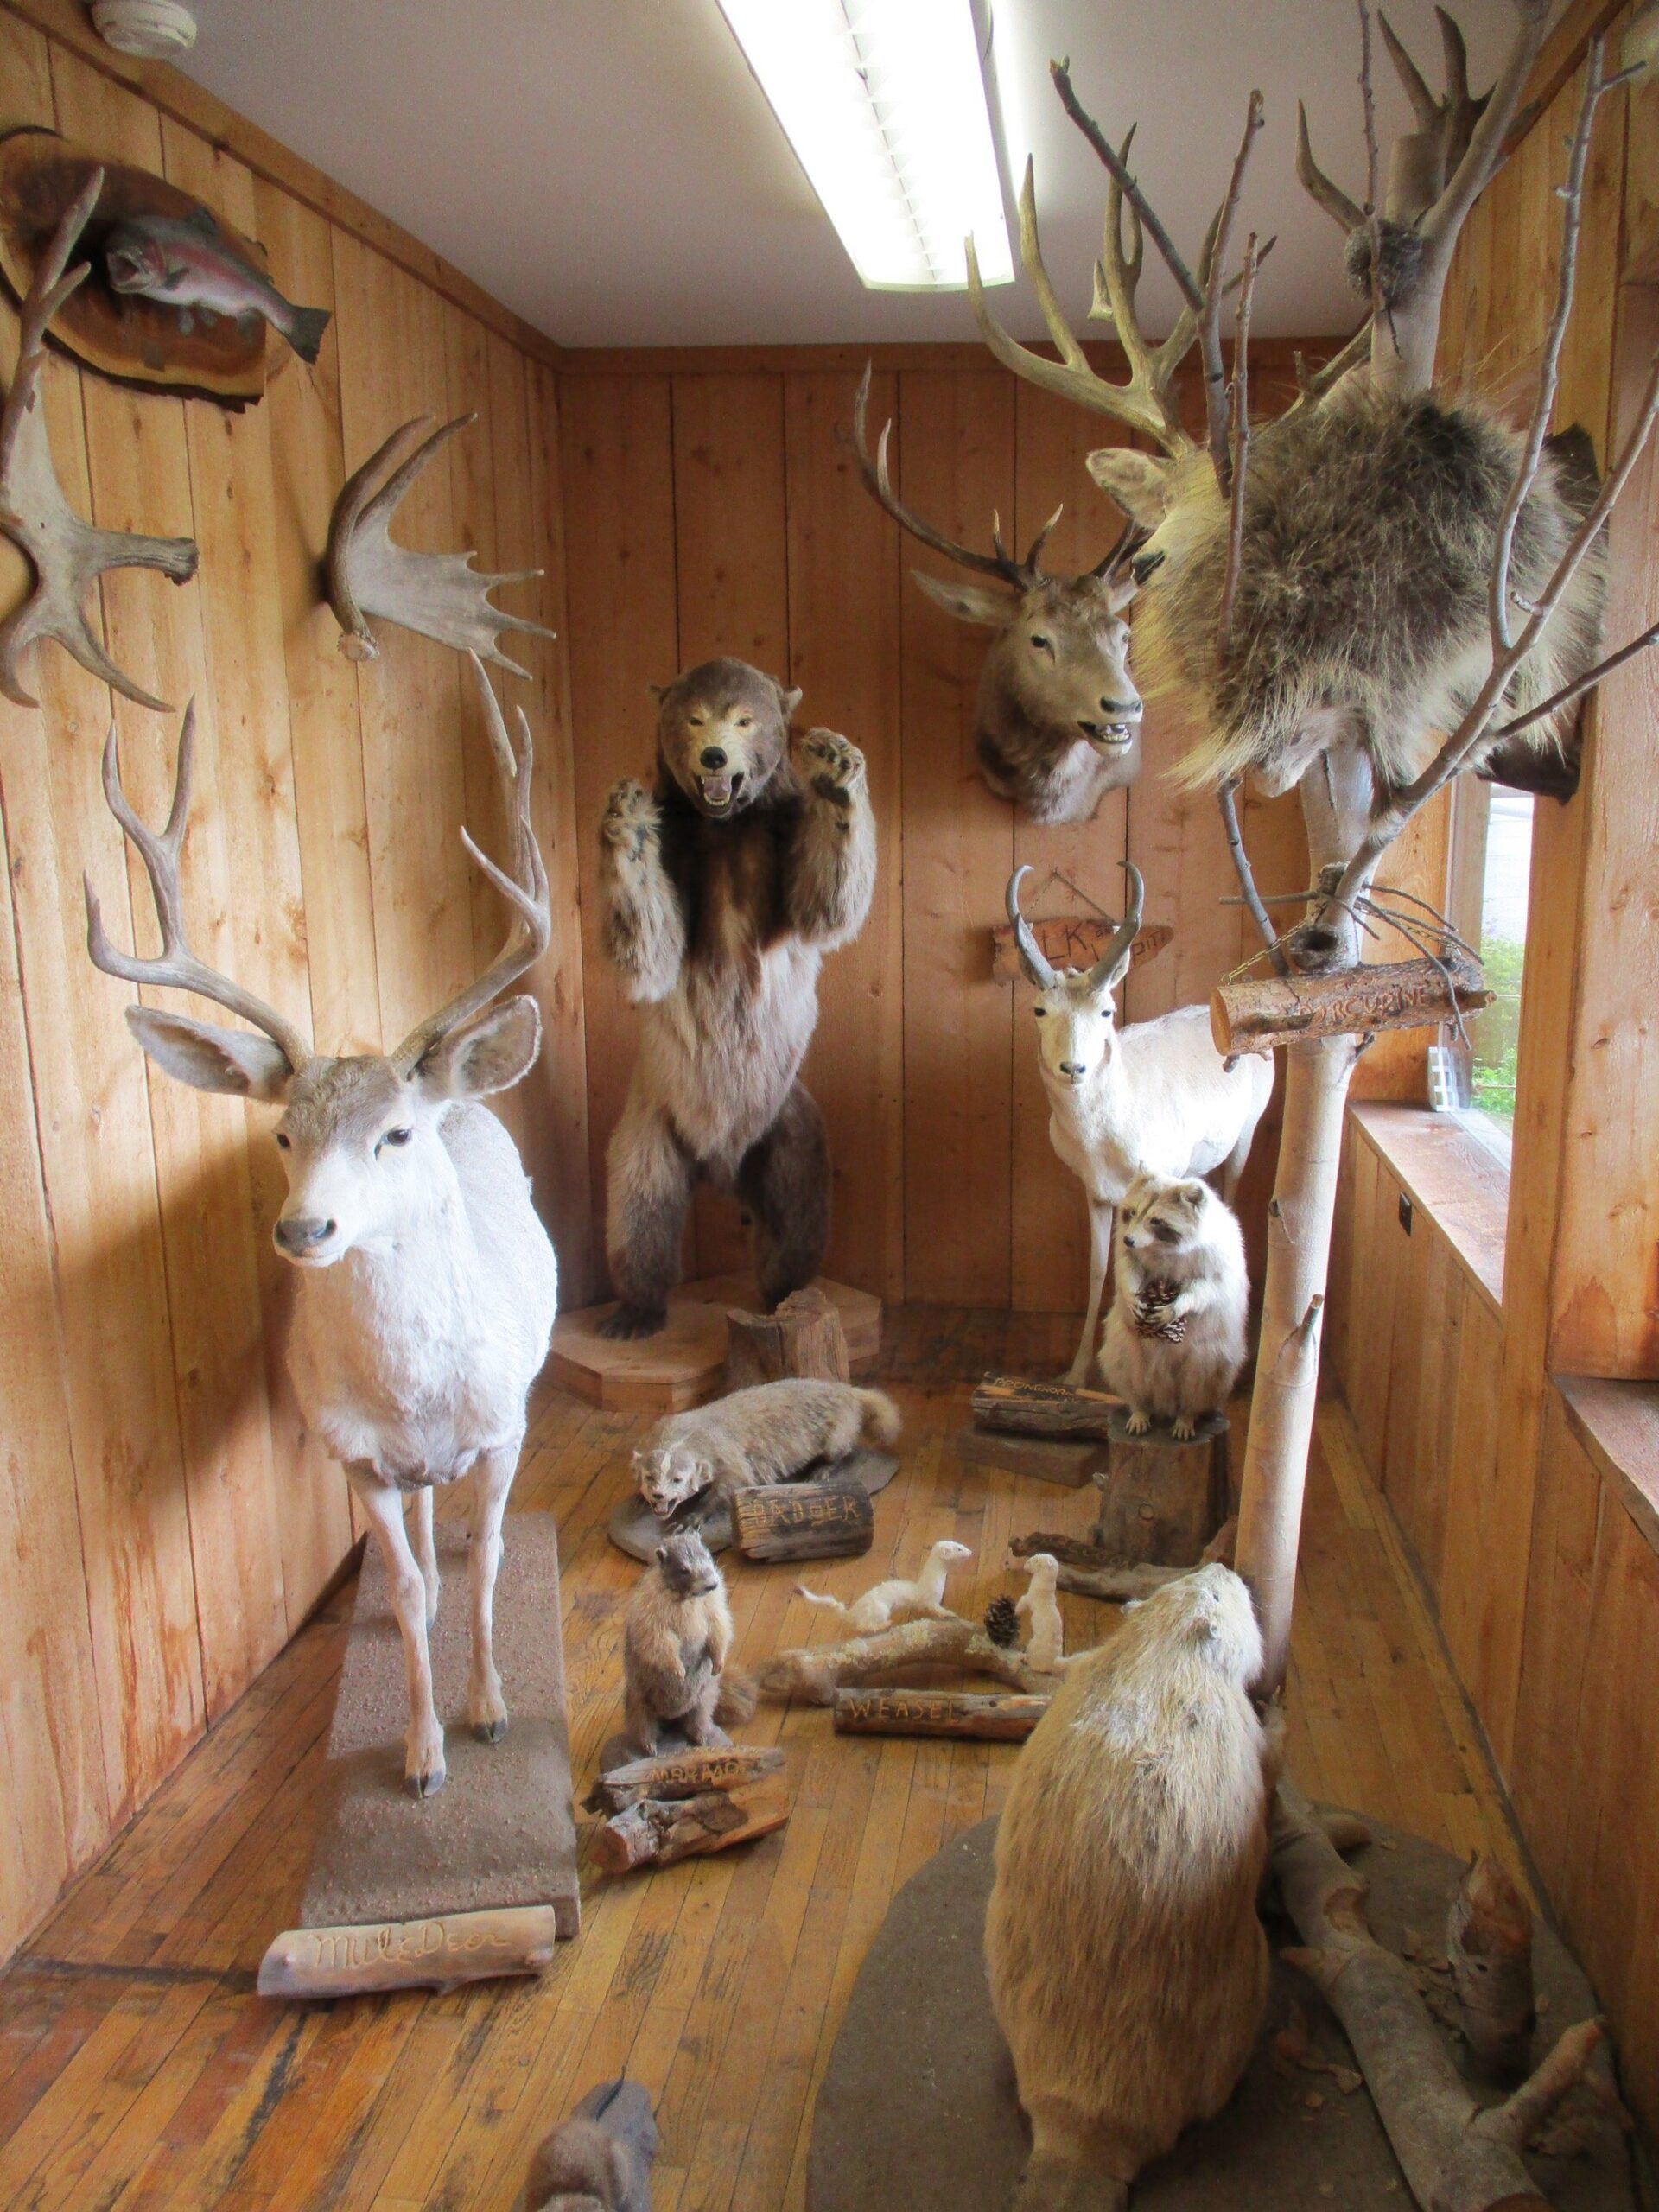 A group of stuff animals in a wood-paneled room.